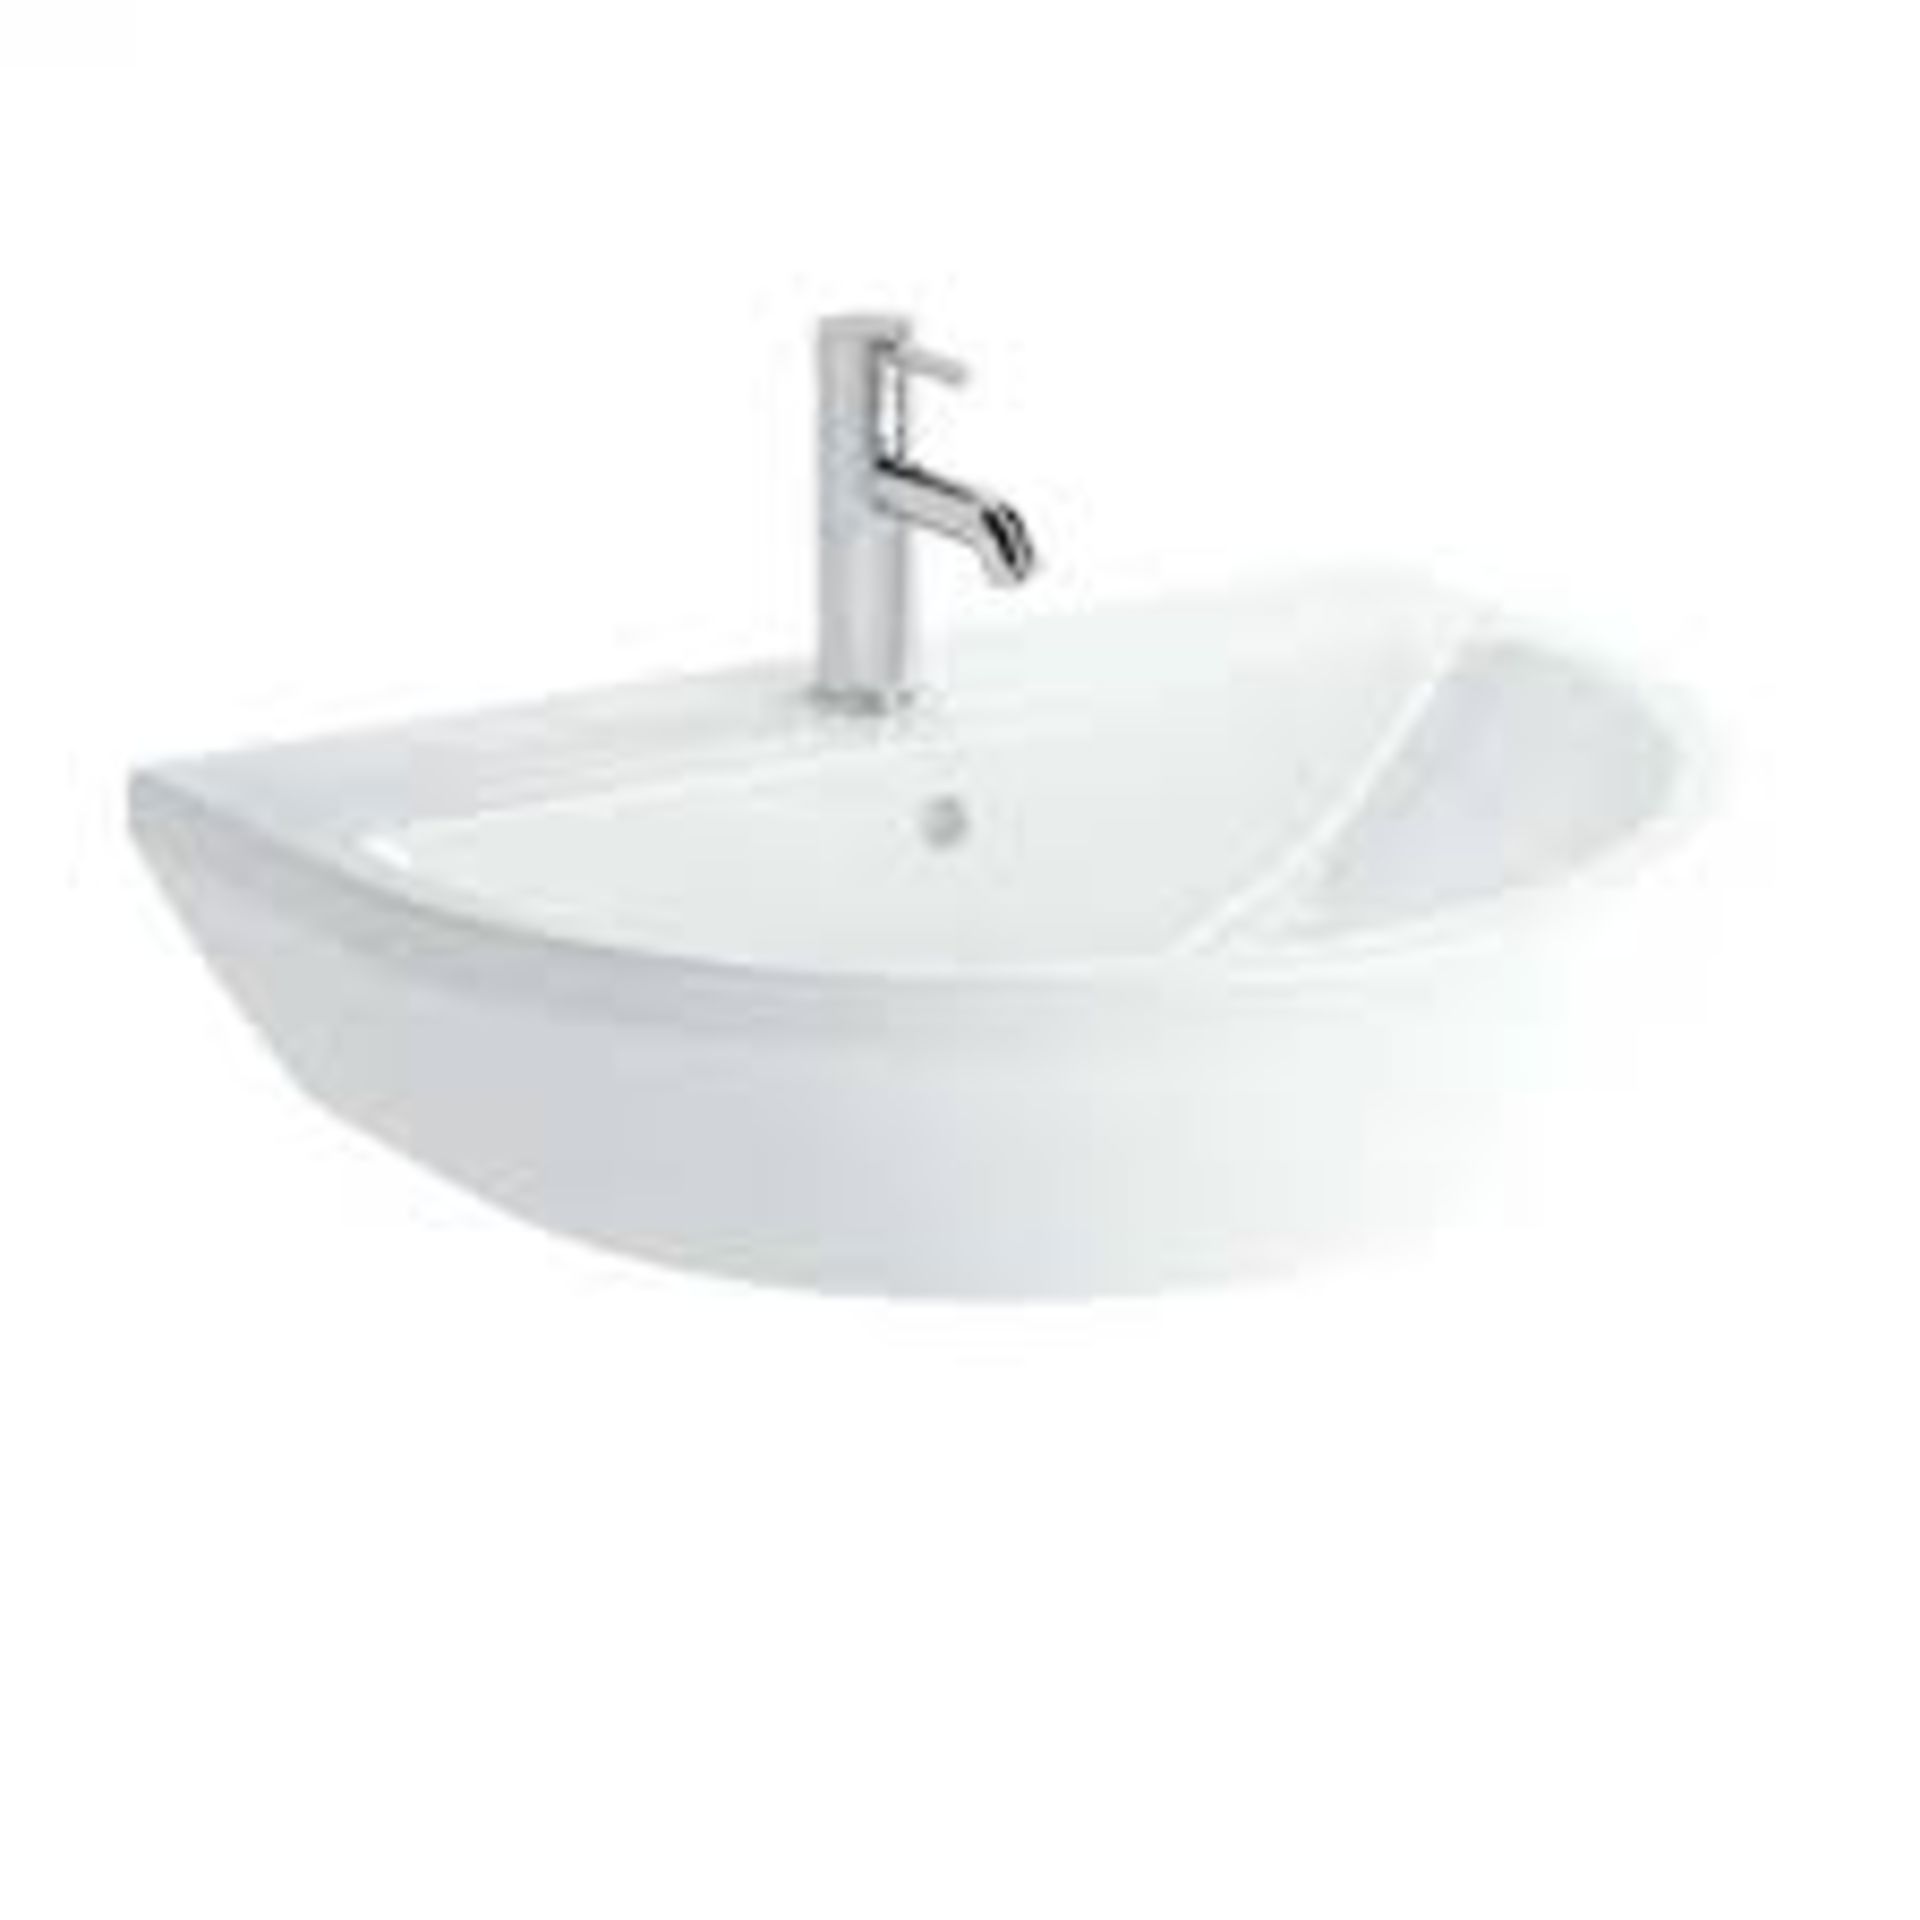 Boxed 650mm Standard Basin Unit in White RRP £140 (12954) (Public Viewing and Appraisals Available)